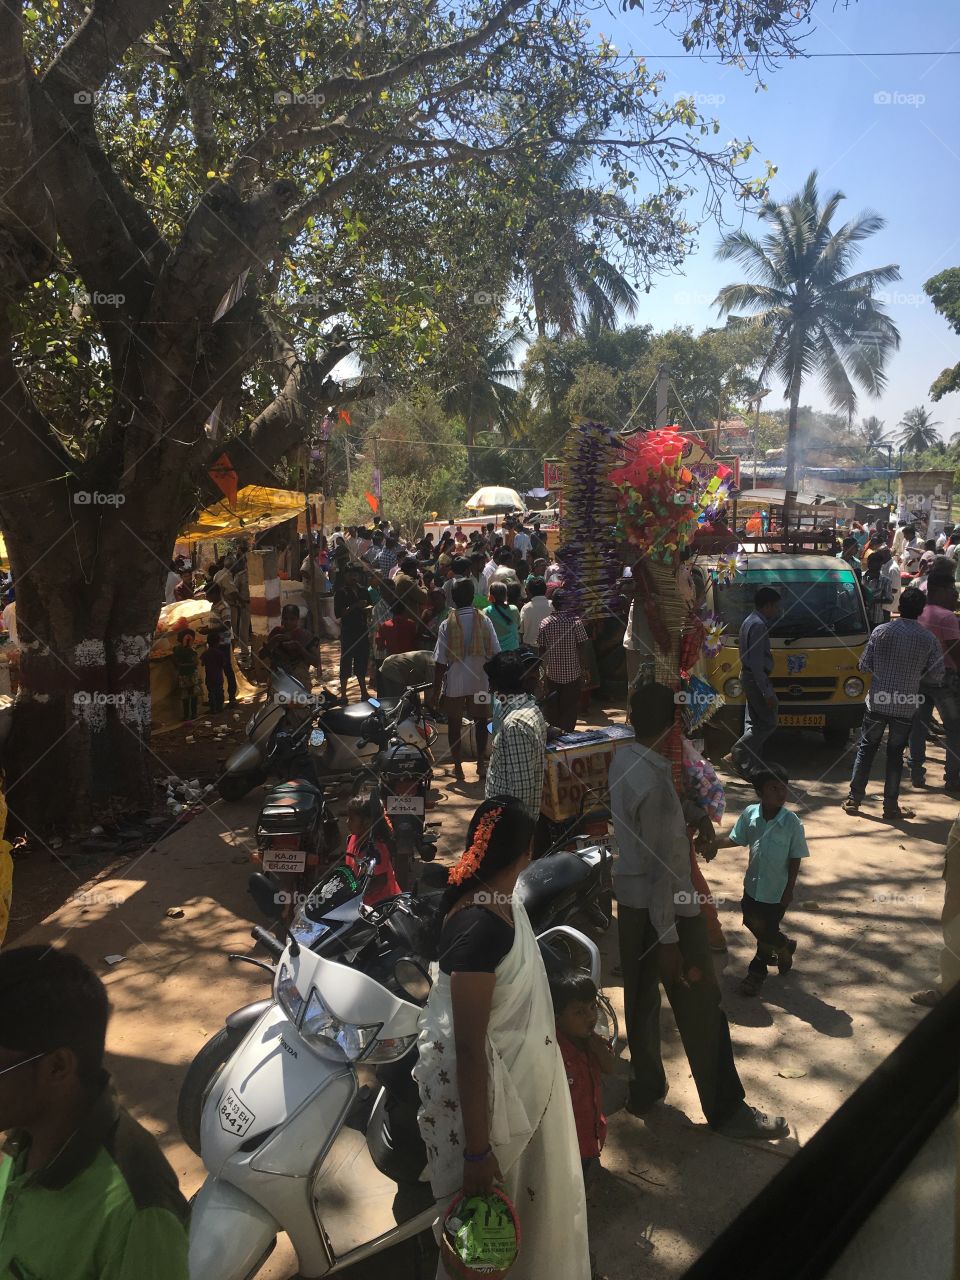 The streets of rural India